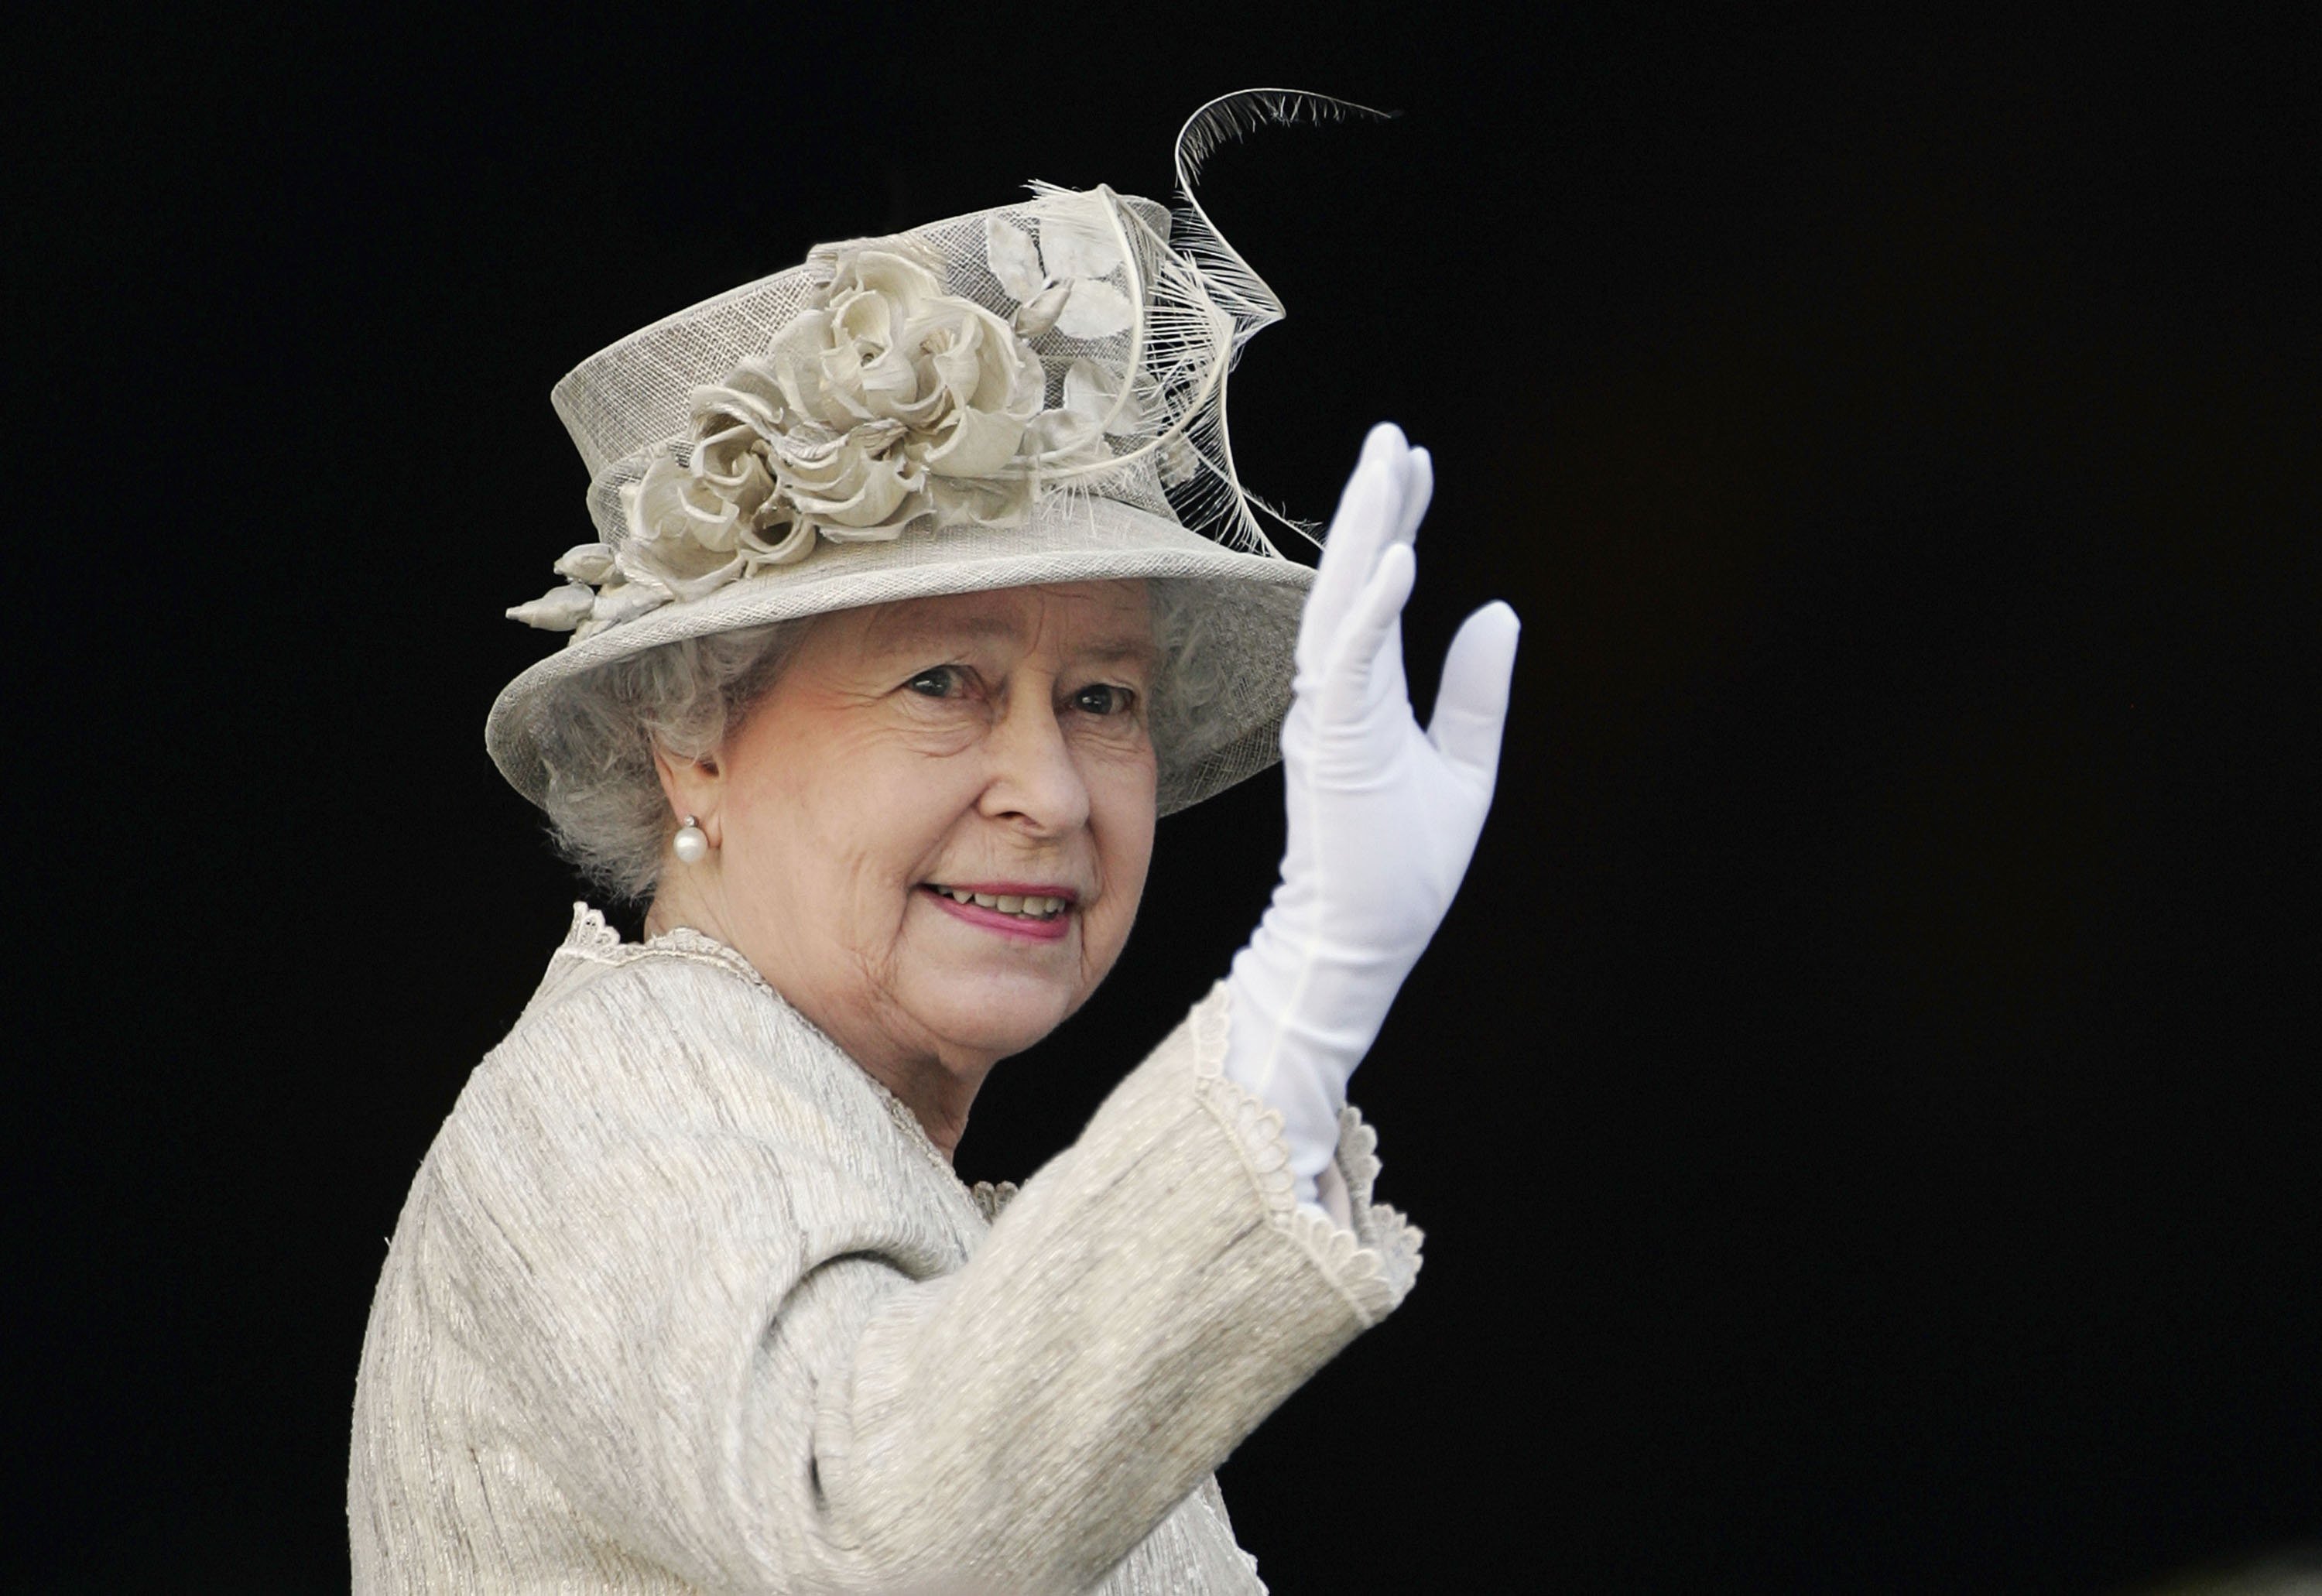 Queen Elizabeth waves while wearing a white outfit.